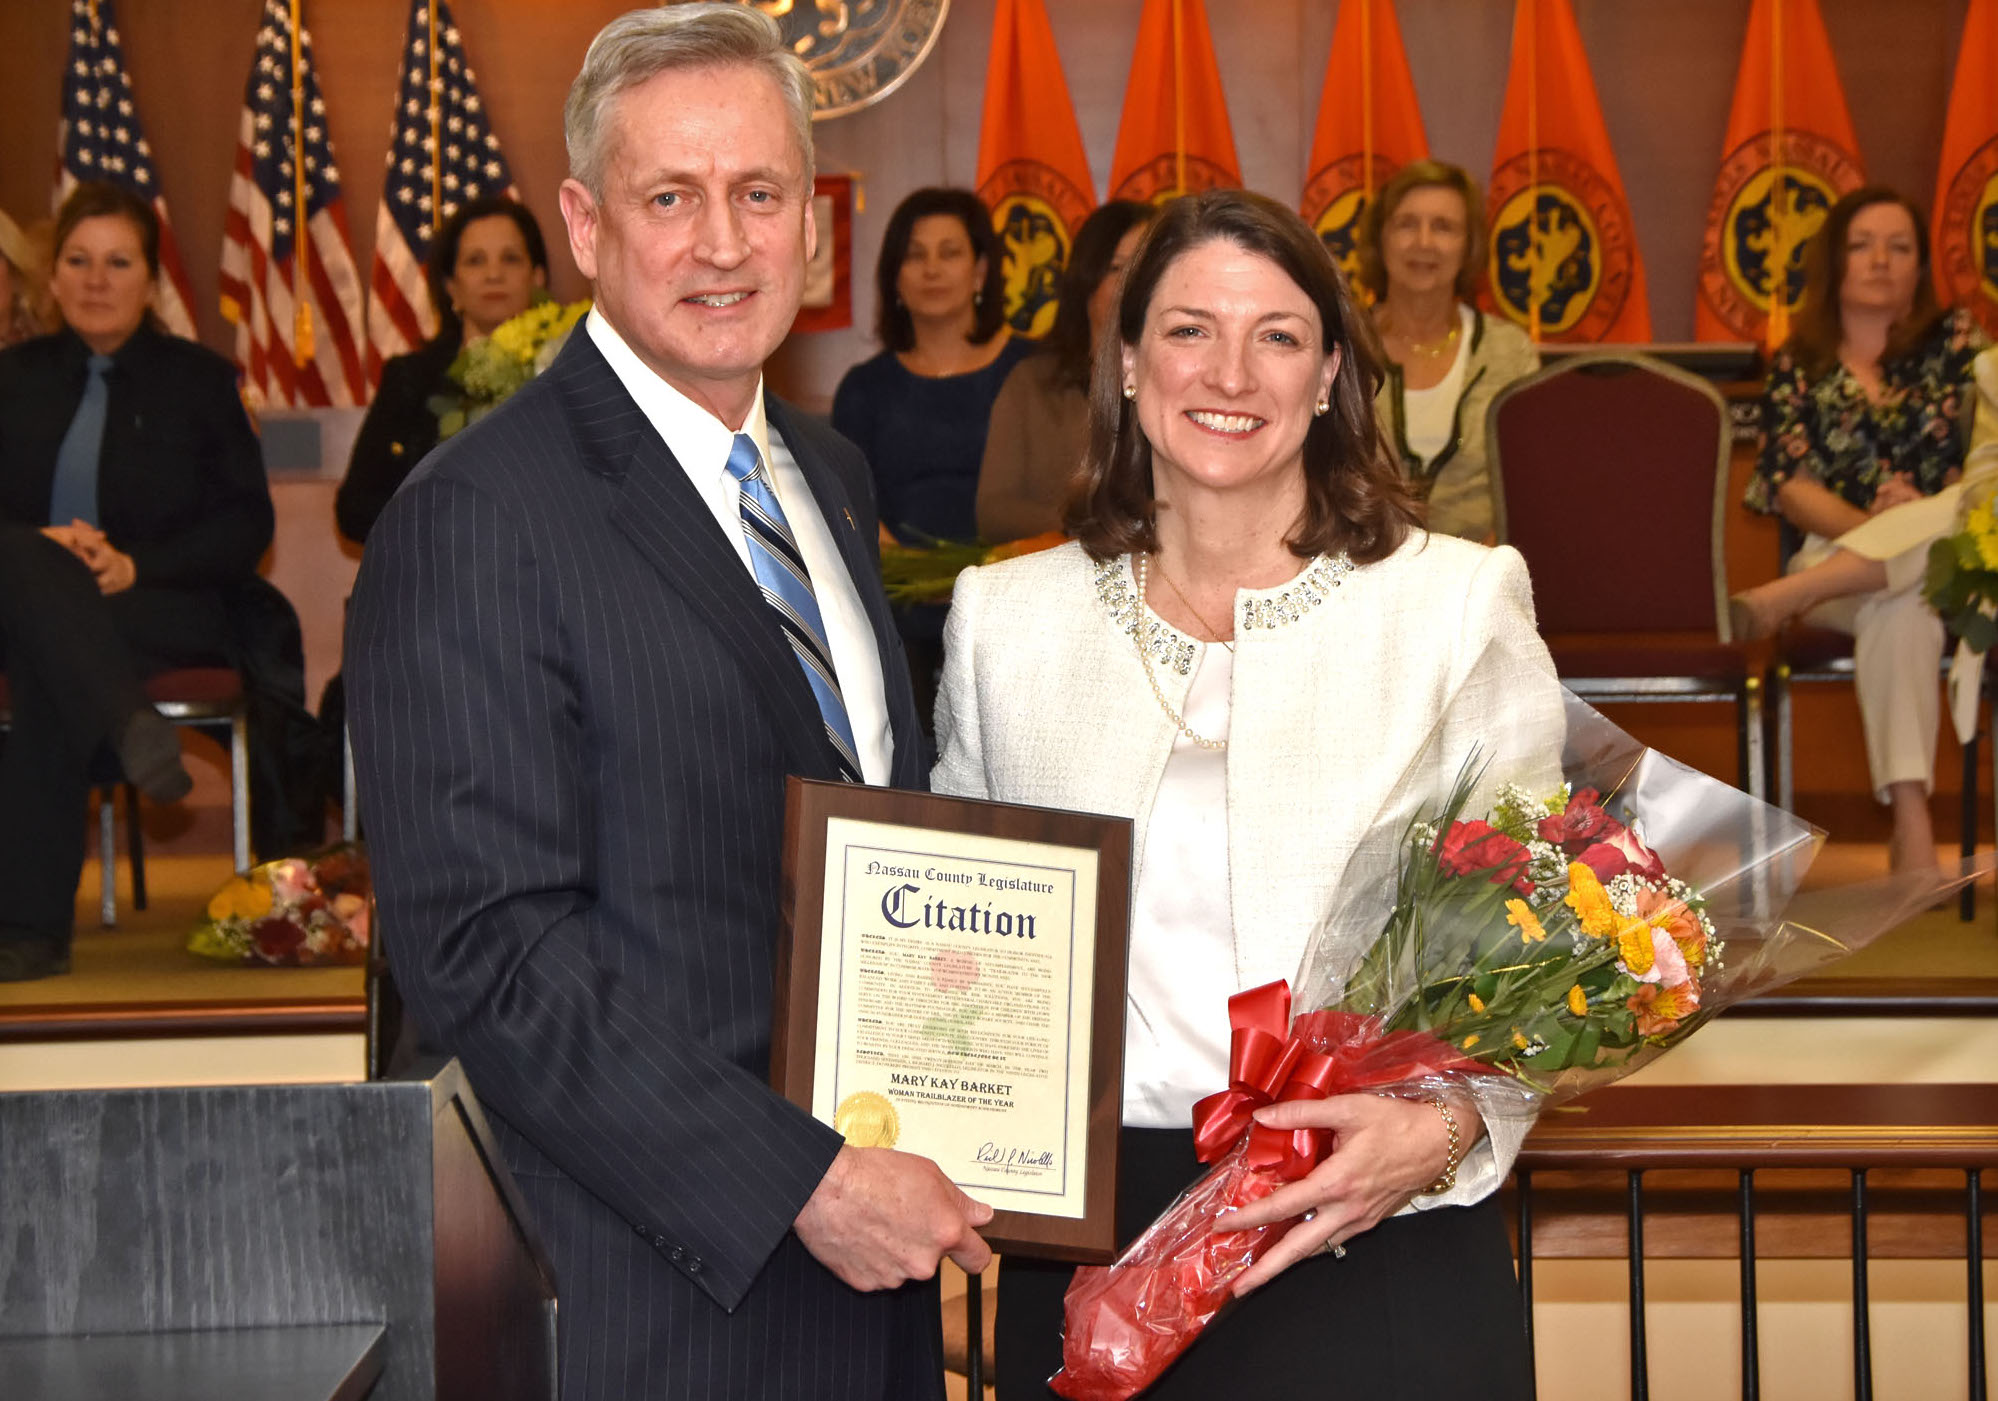 ‘Woman of Distinction’ in Manhasset receives honor for service